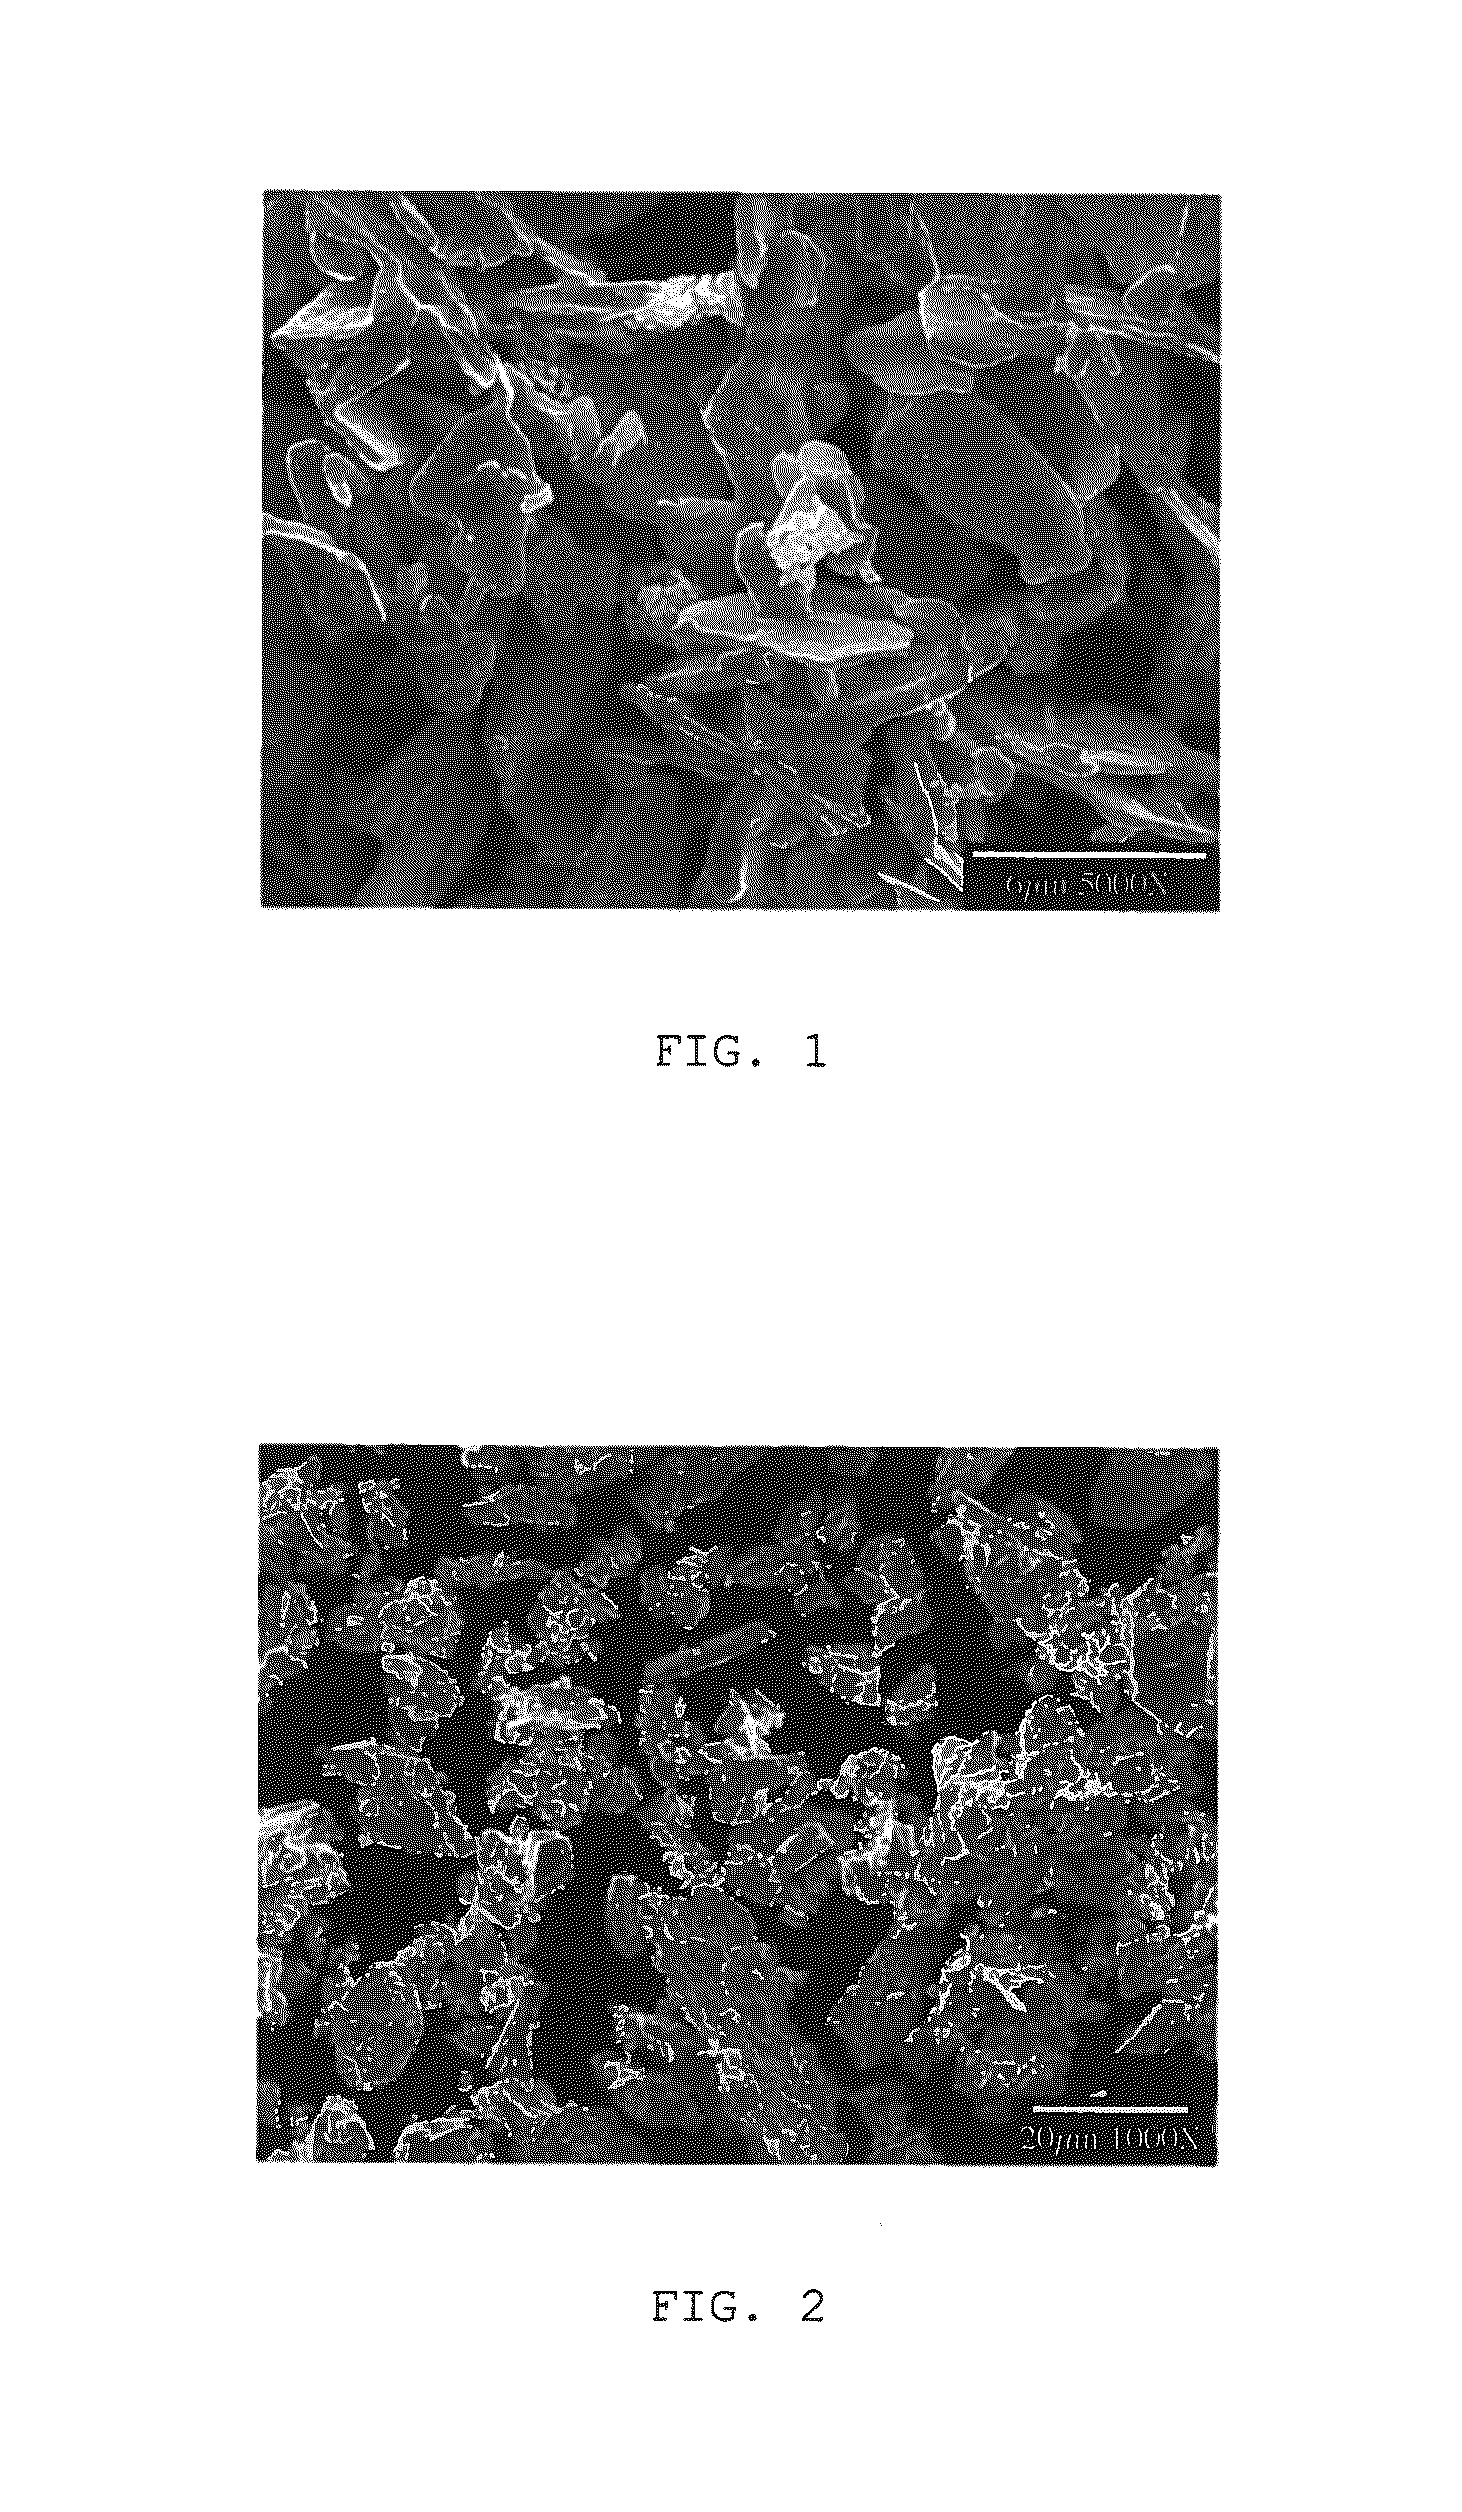 High voltage tantalum anode and method of manufacture